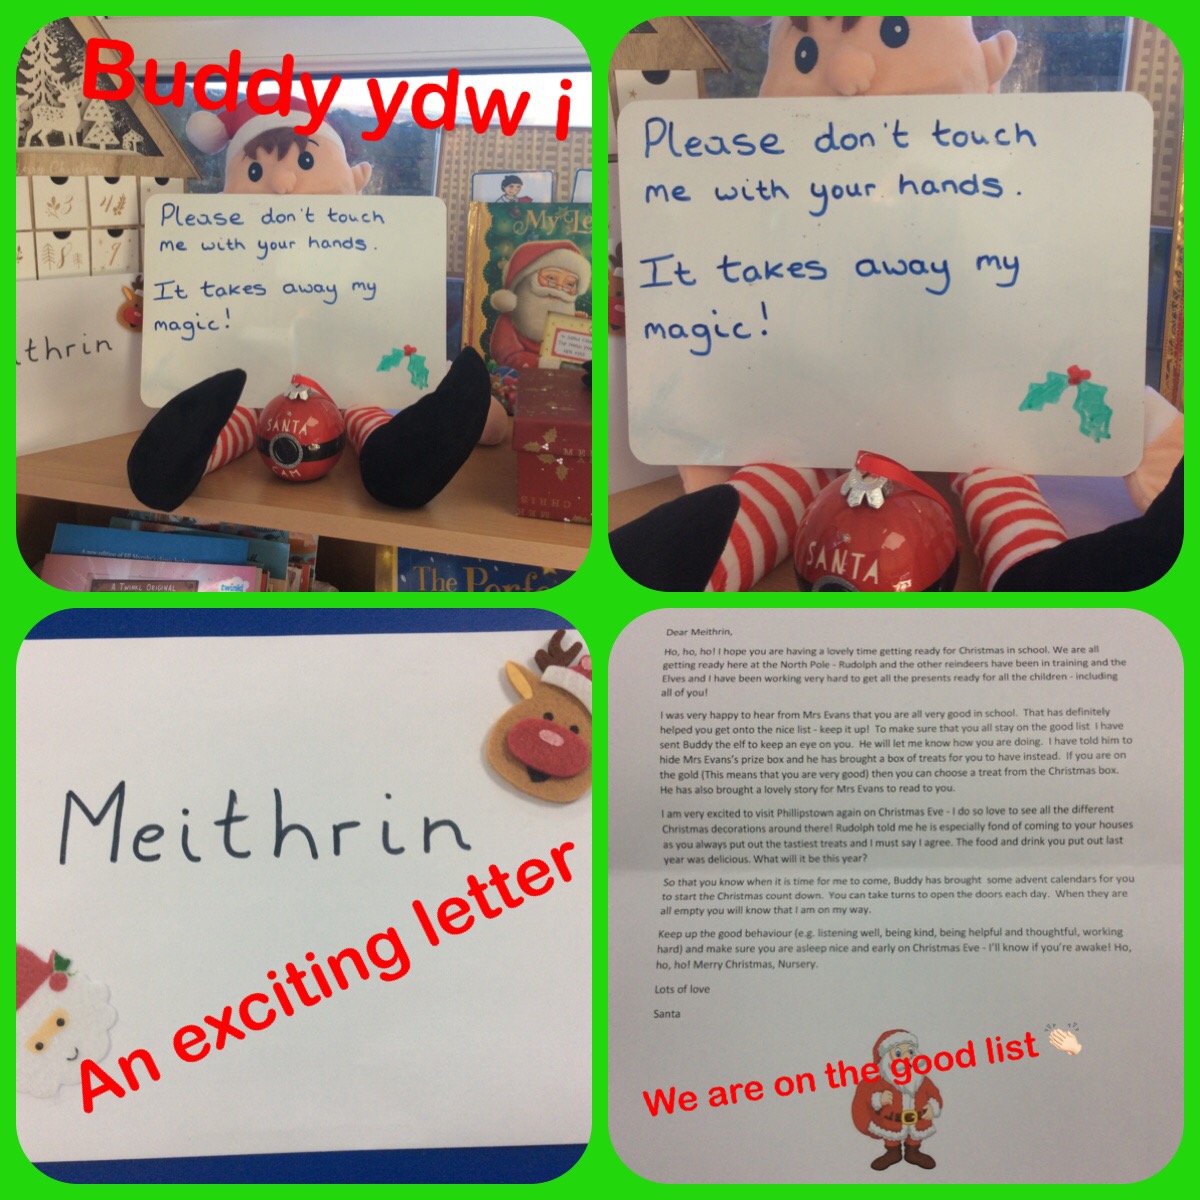 Meithrin were excited to meet Buddy the Elf today. Santa sent him to keep an eye on them. They are working hard to stay on the good list 🎅🎄@Phip_Primary